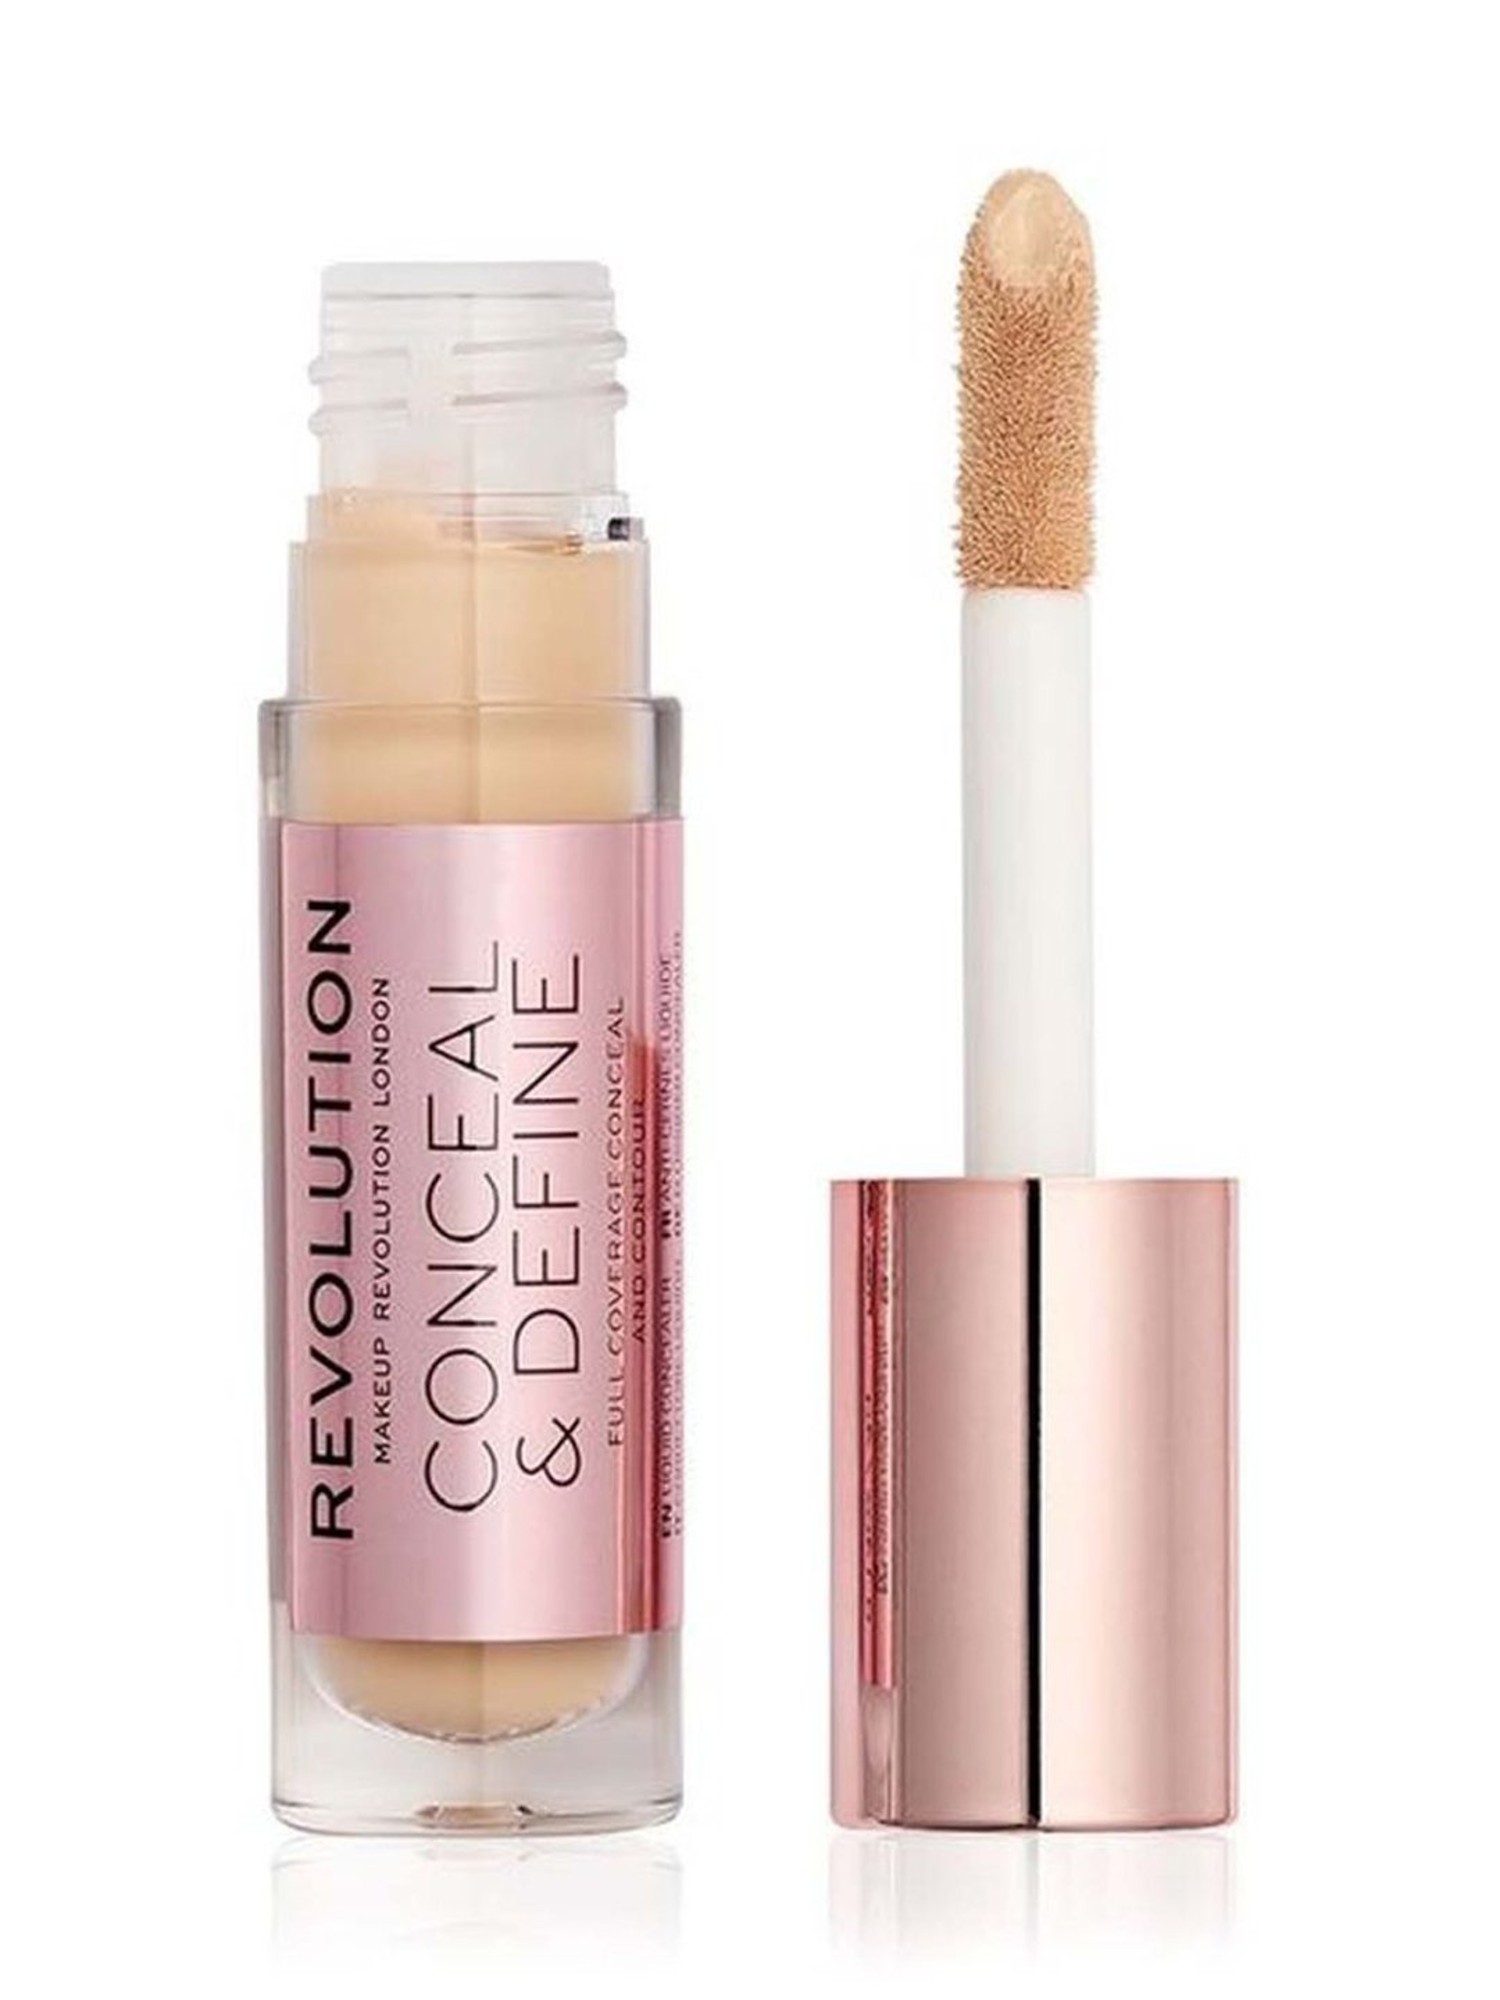  Revolution Makeup Conceal and Define Concealer, Full Coverage,  Concealer Makeup Best Foundation for Every Skin Type and Tone, Face Makeup  Concealer (C3) : Beauty & Personal Care